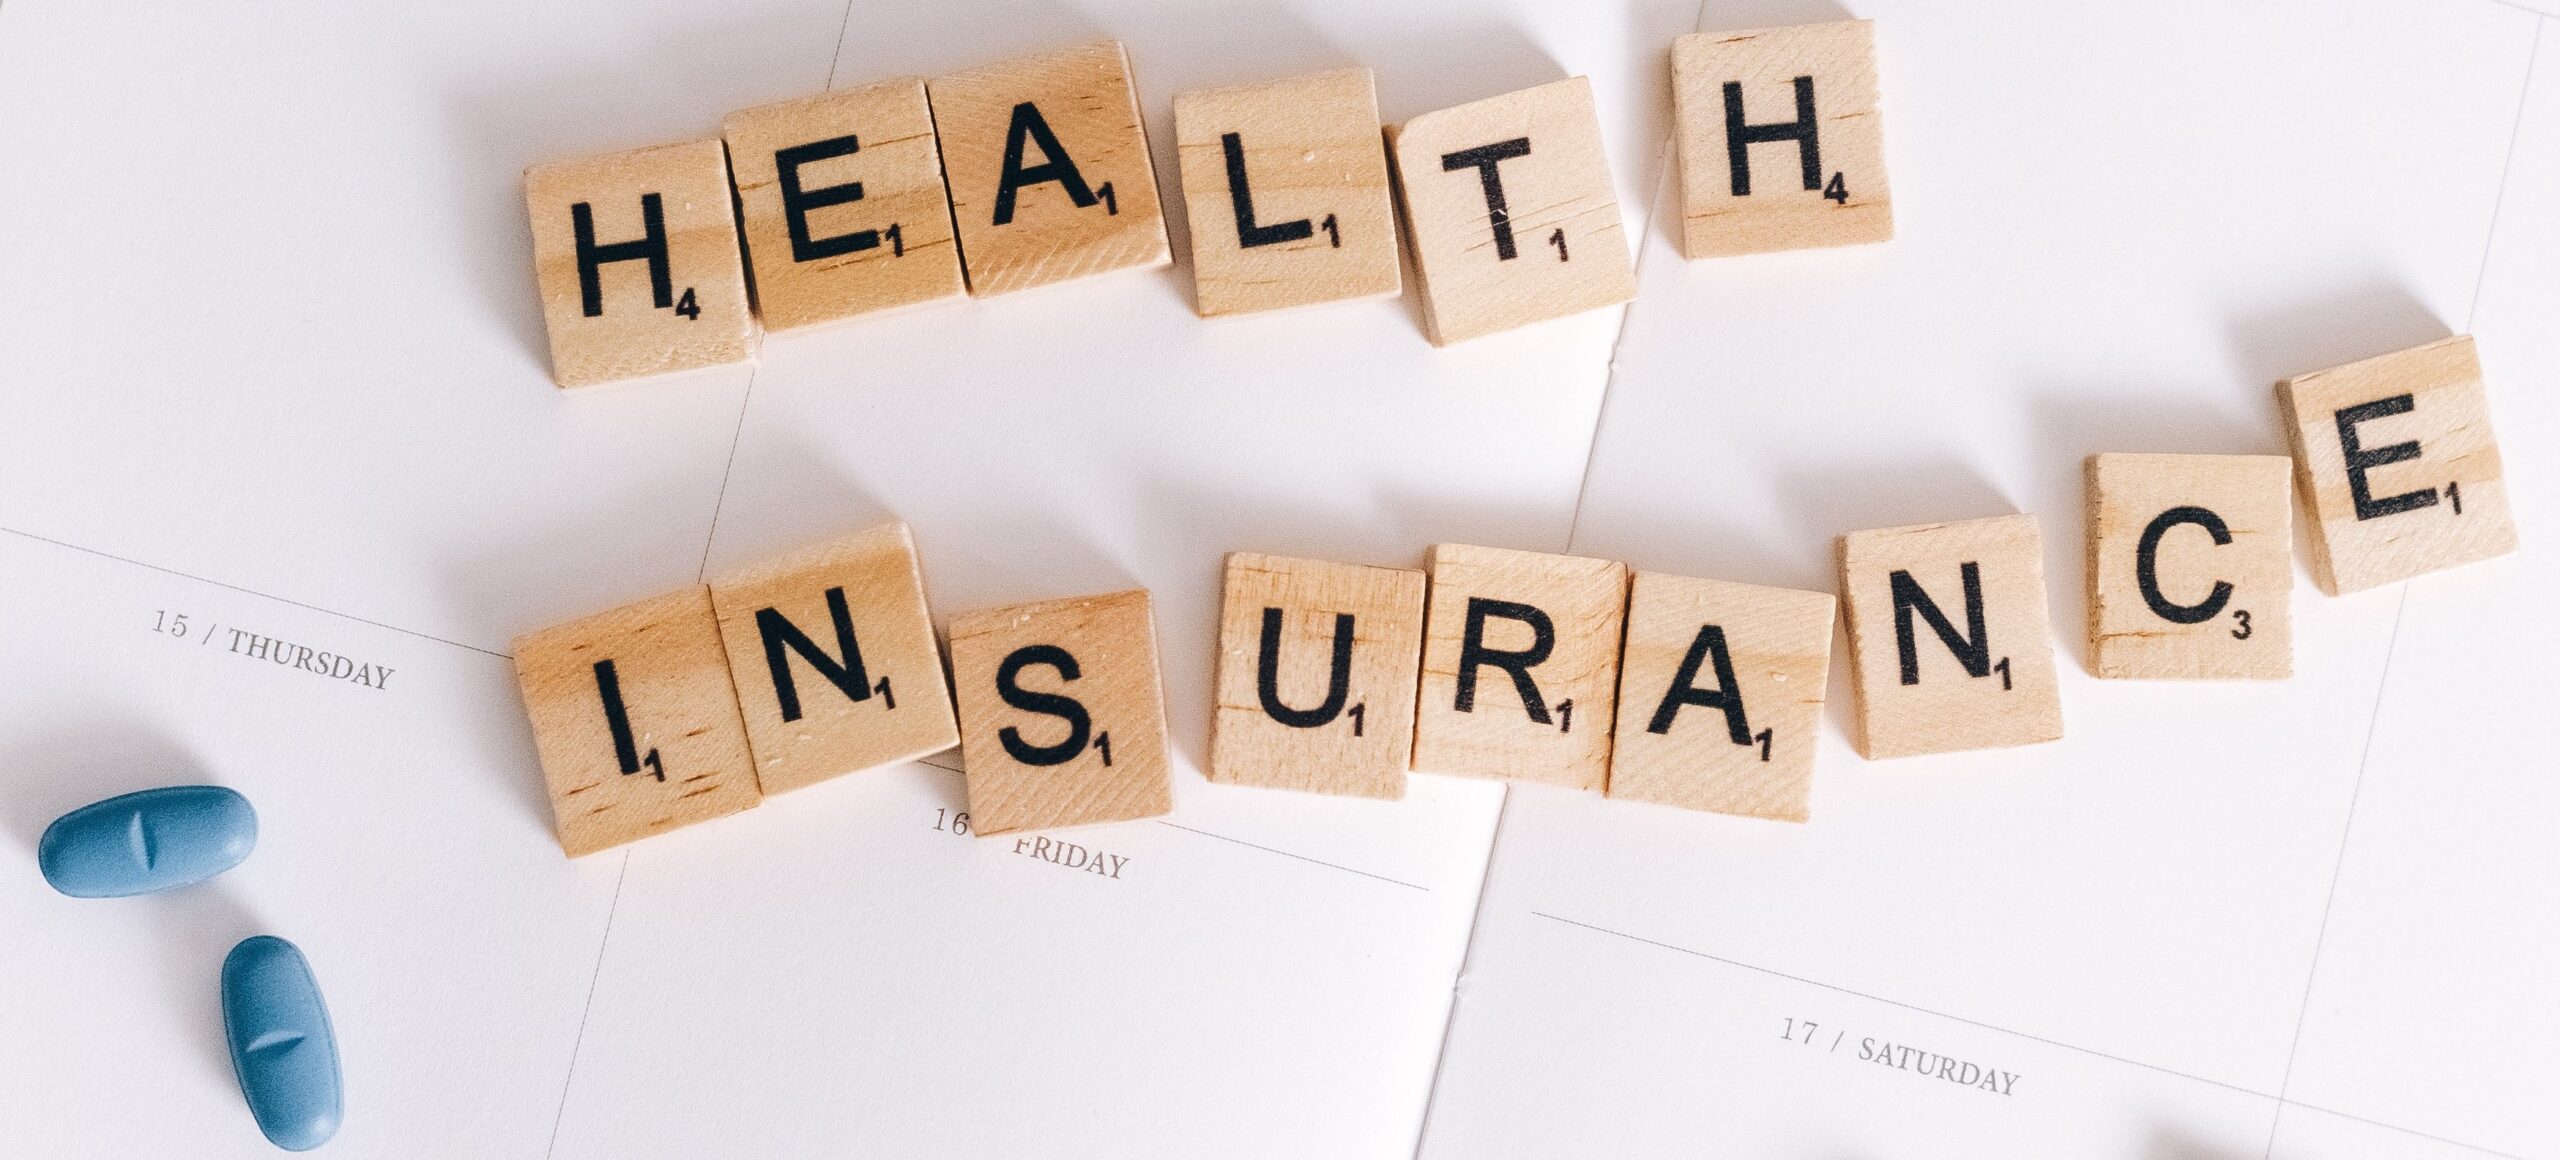 health insurance relates to financial planning